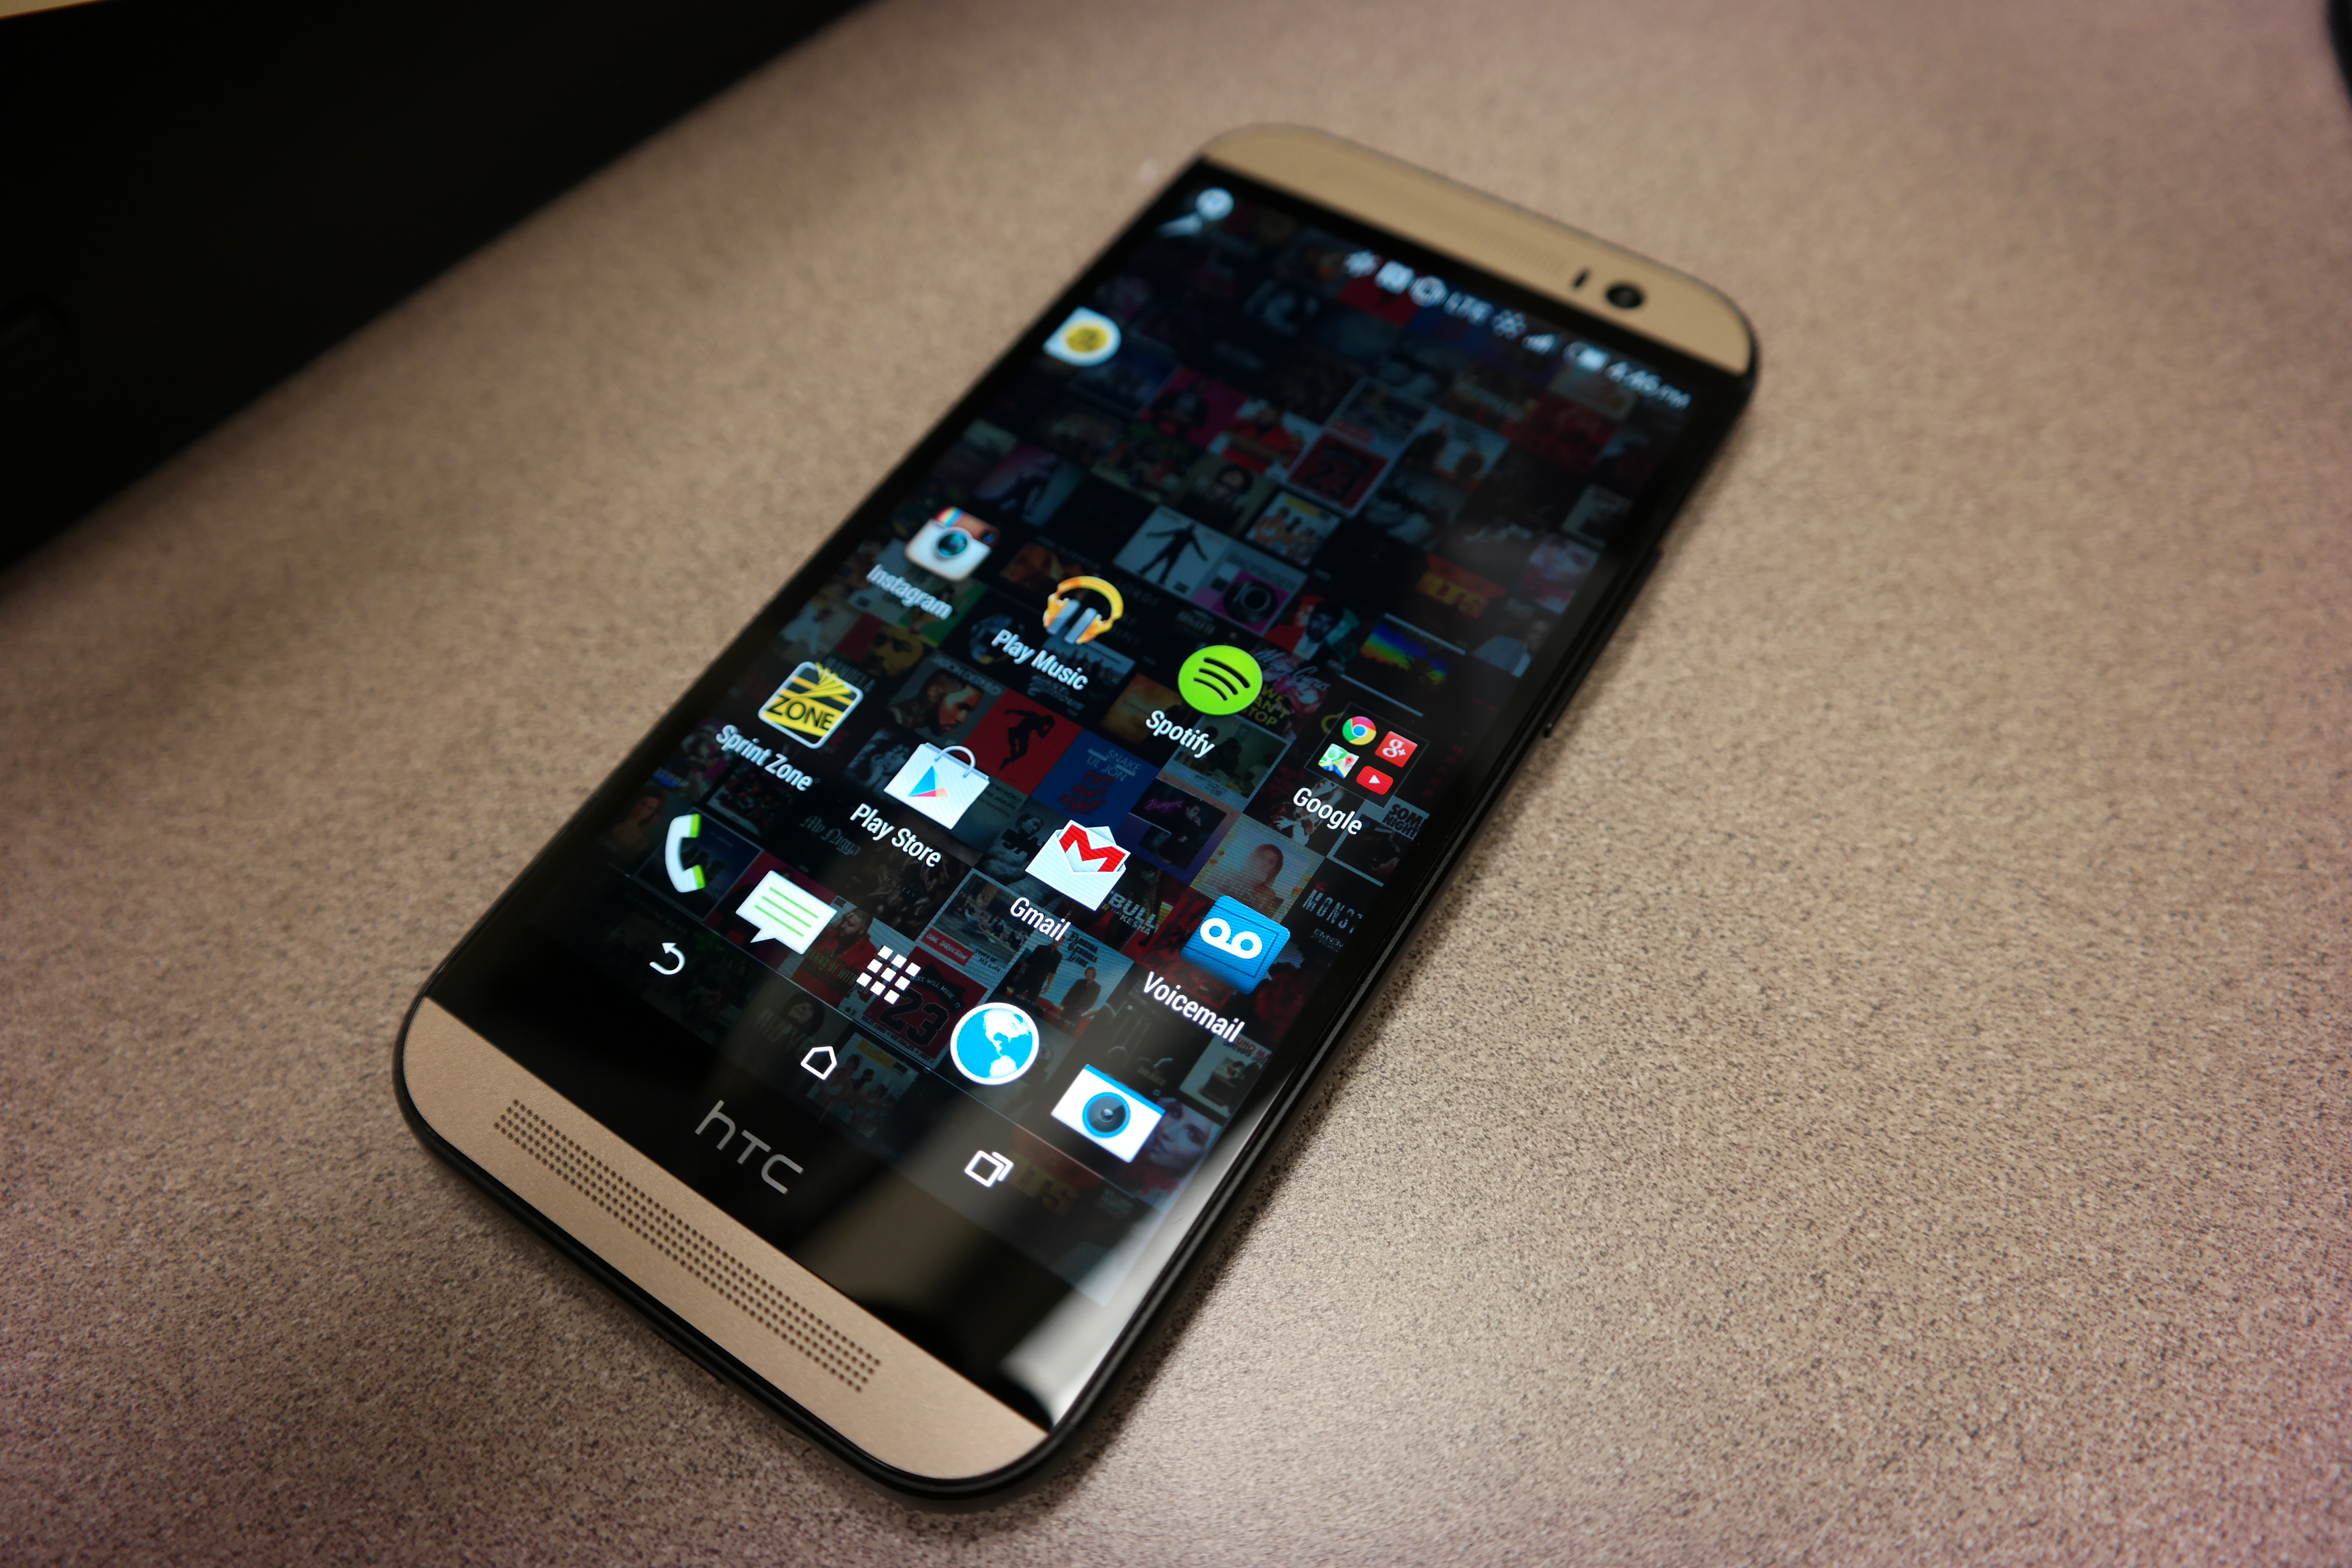 HTC One (M8) Review: The New Best Android Smartphone